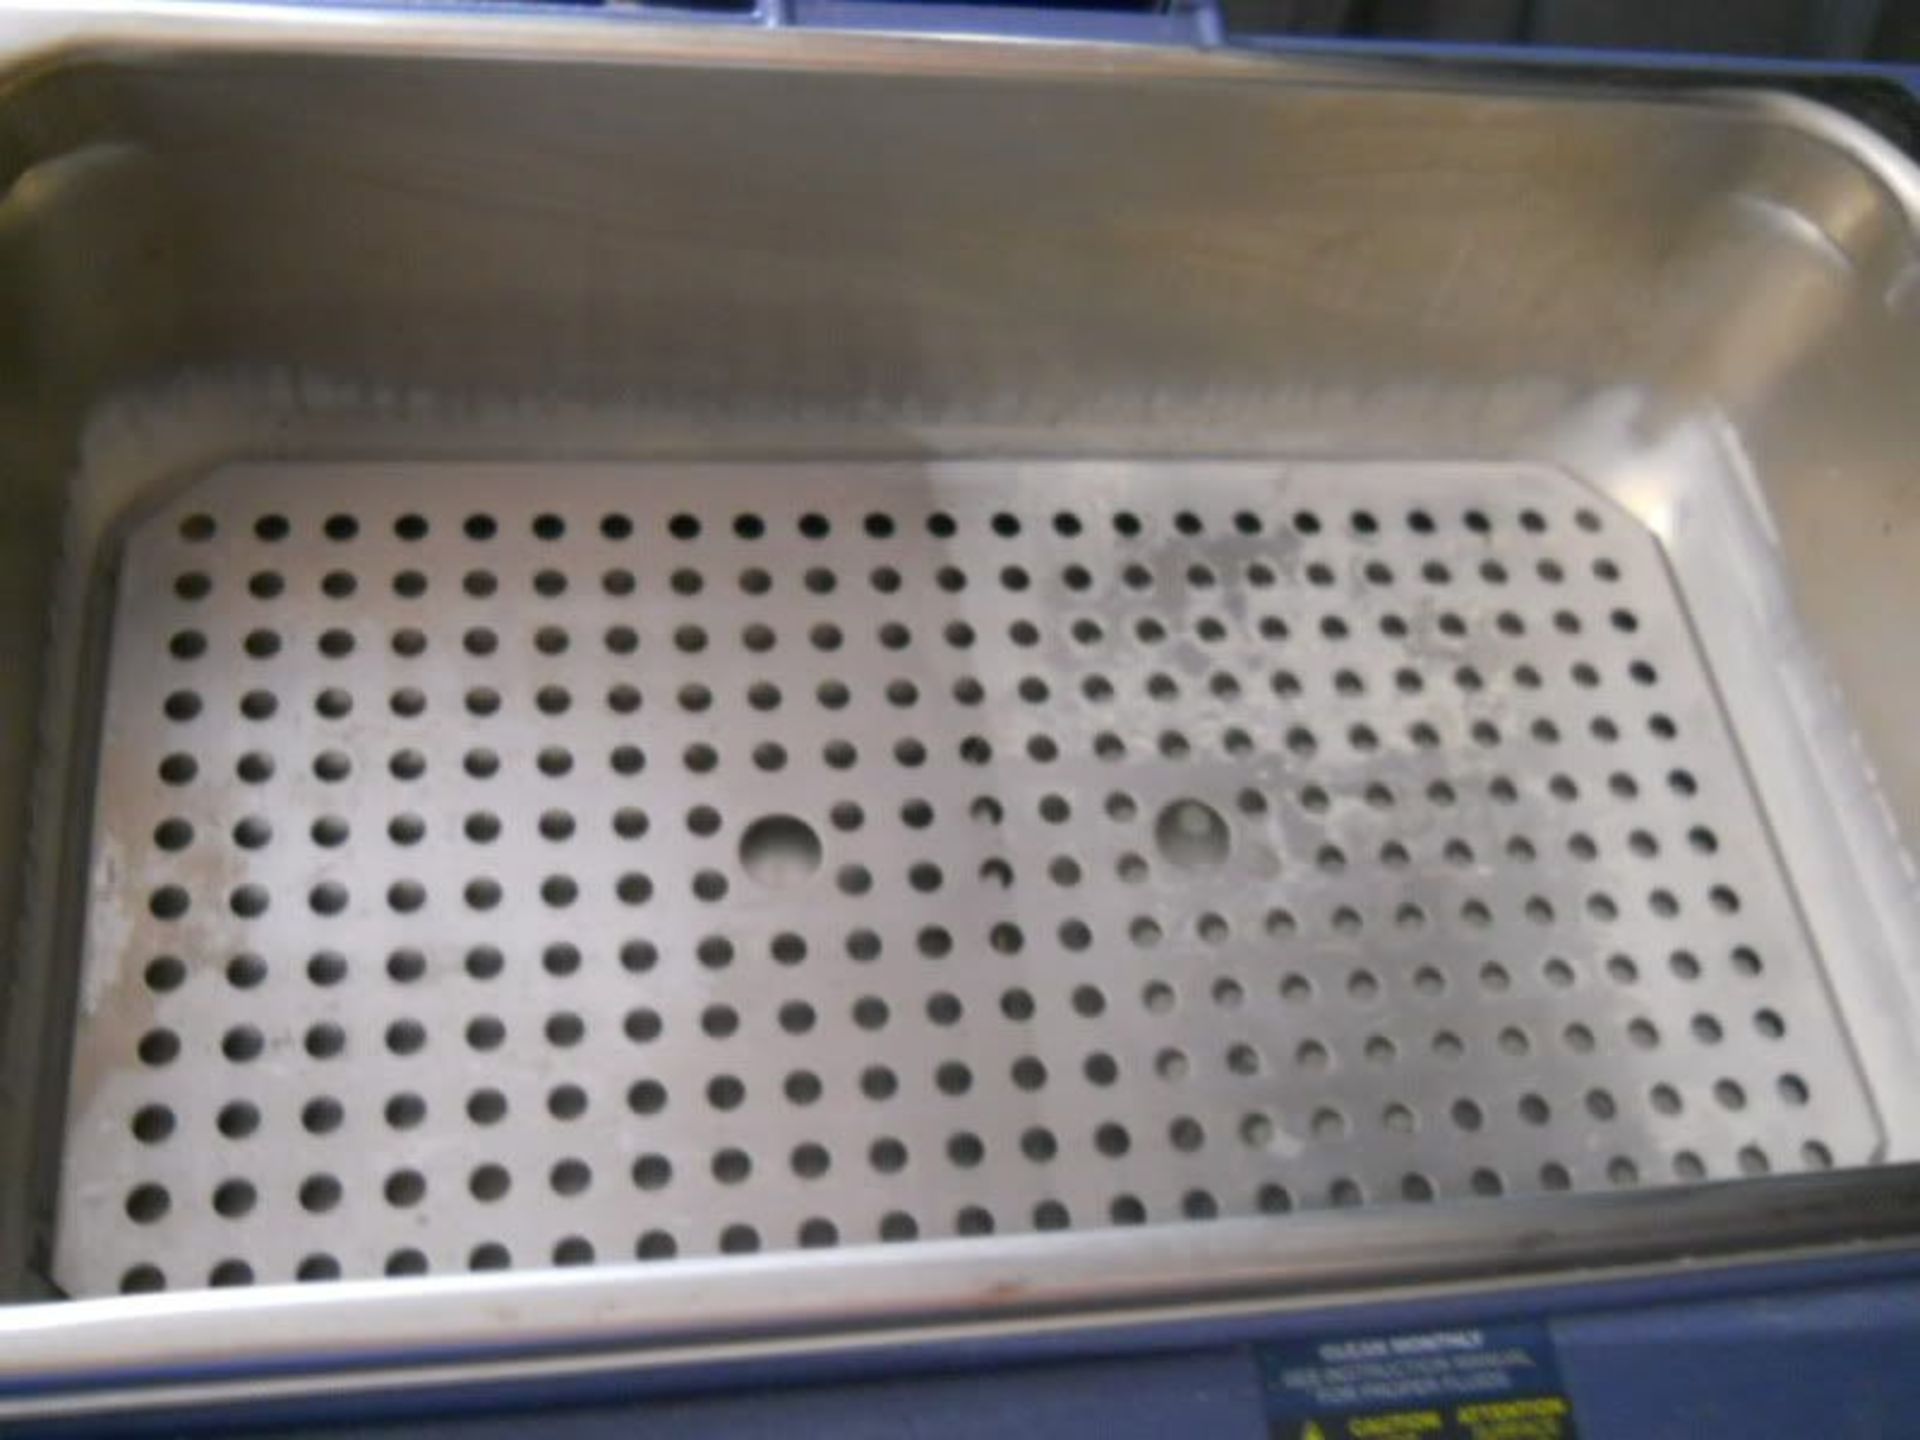 Fisher Scientific Isotemp 120 Water Bath Cat No 15-460-S20 (15460S20) Stainless, Qty 1, - Image 6 of 7